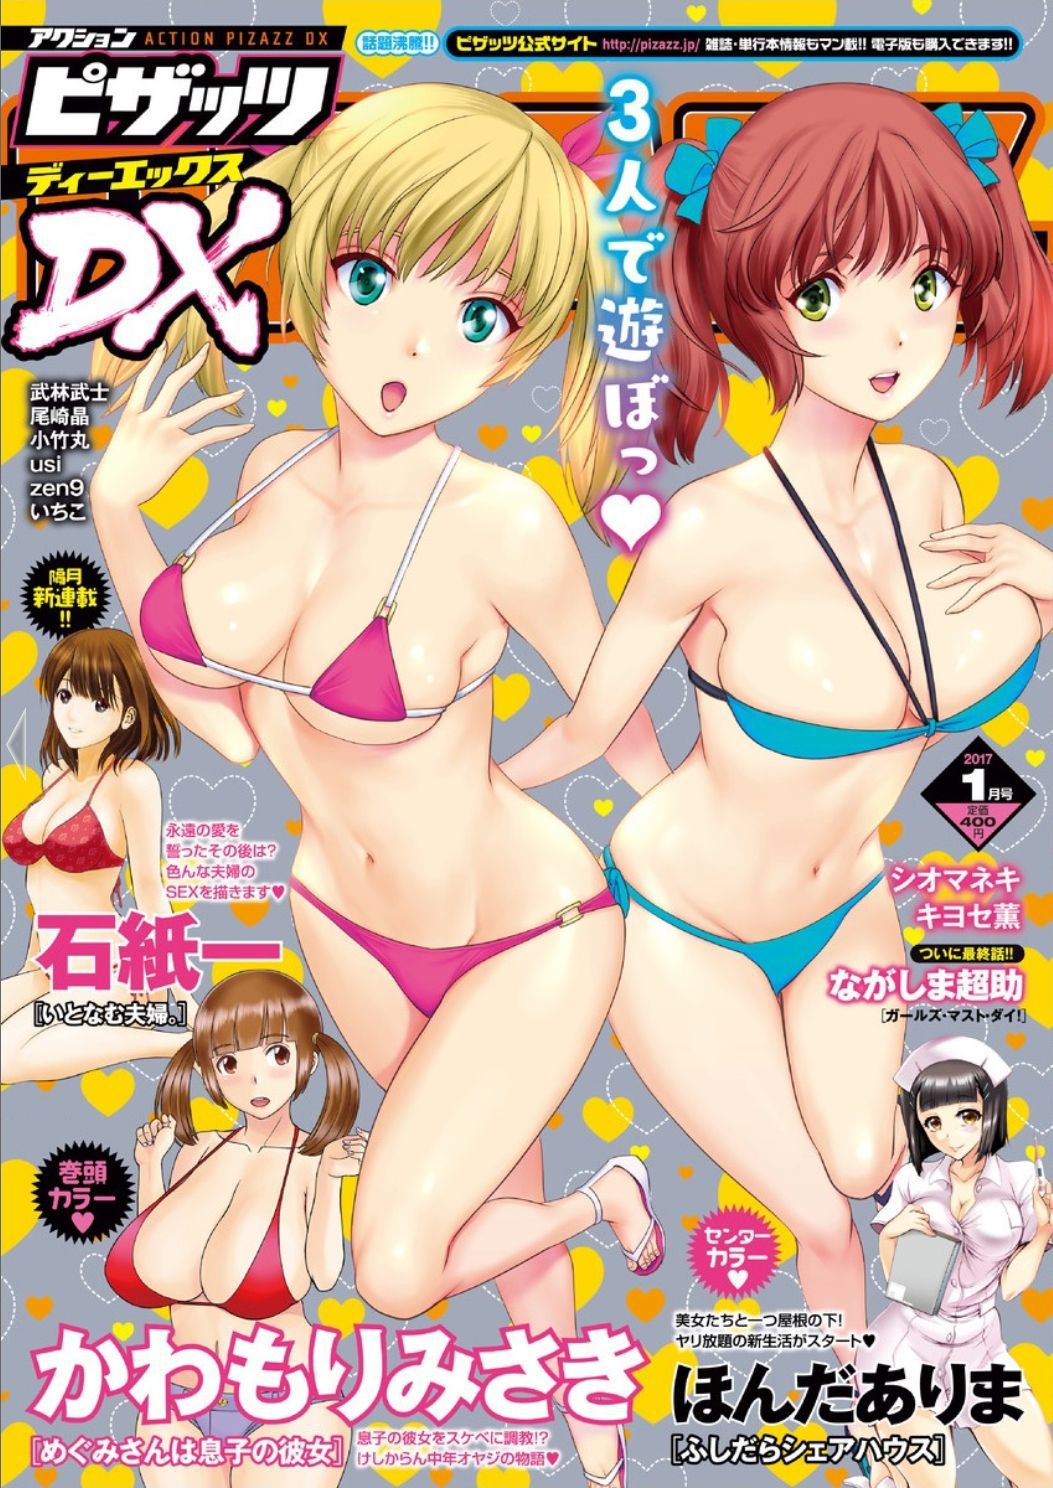 [Saigado] Cover Illustrations [彩画堂] Cover Illustrations 231